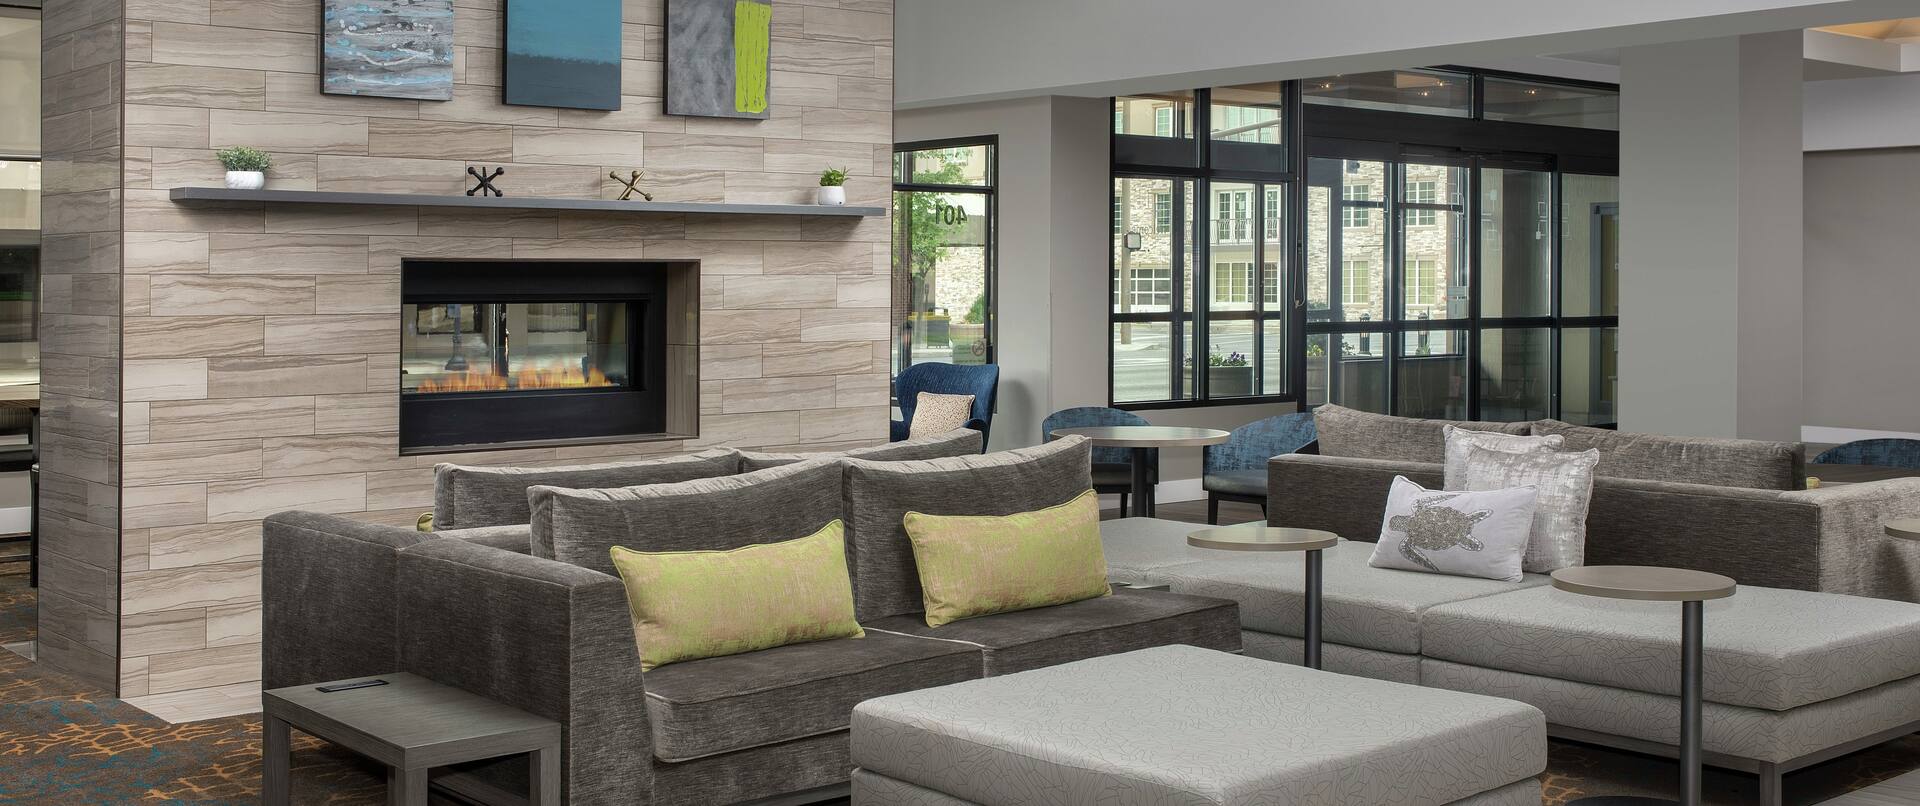 Lobby Seating Area with Soft Seating, Footrest and Fireplace